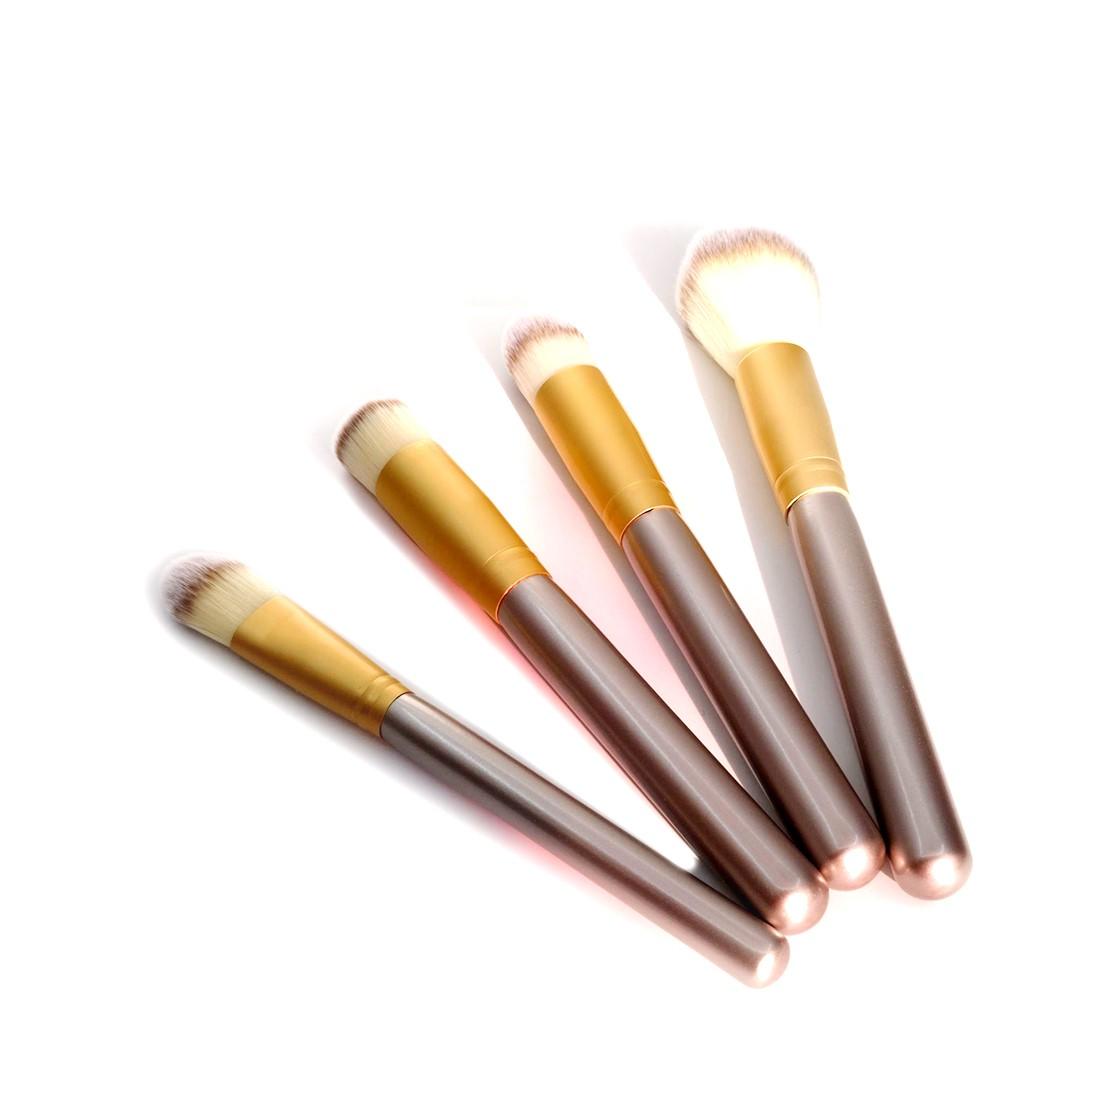 Suprabeauty foundation brush set from China for promotion